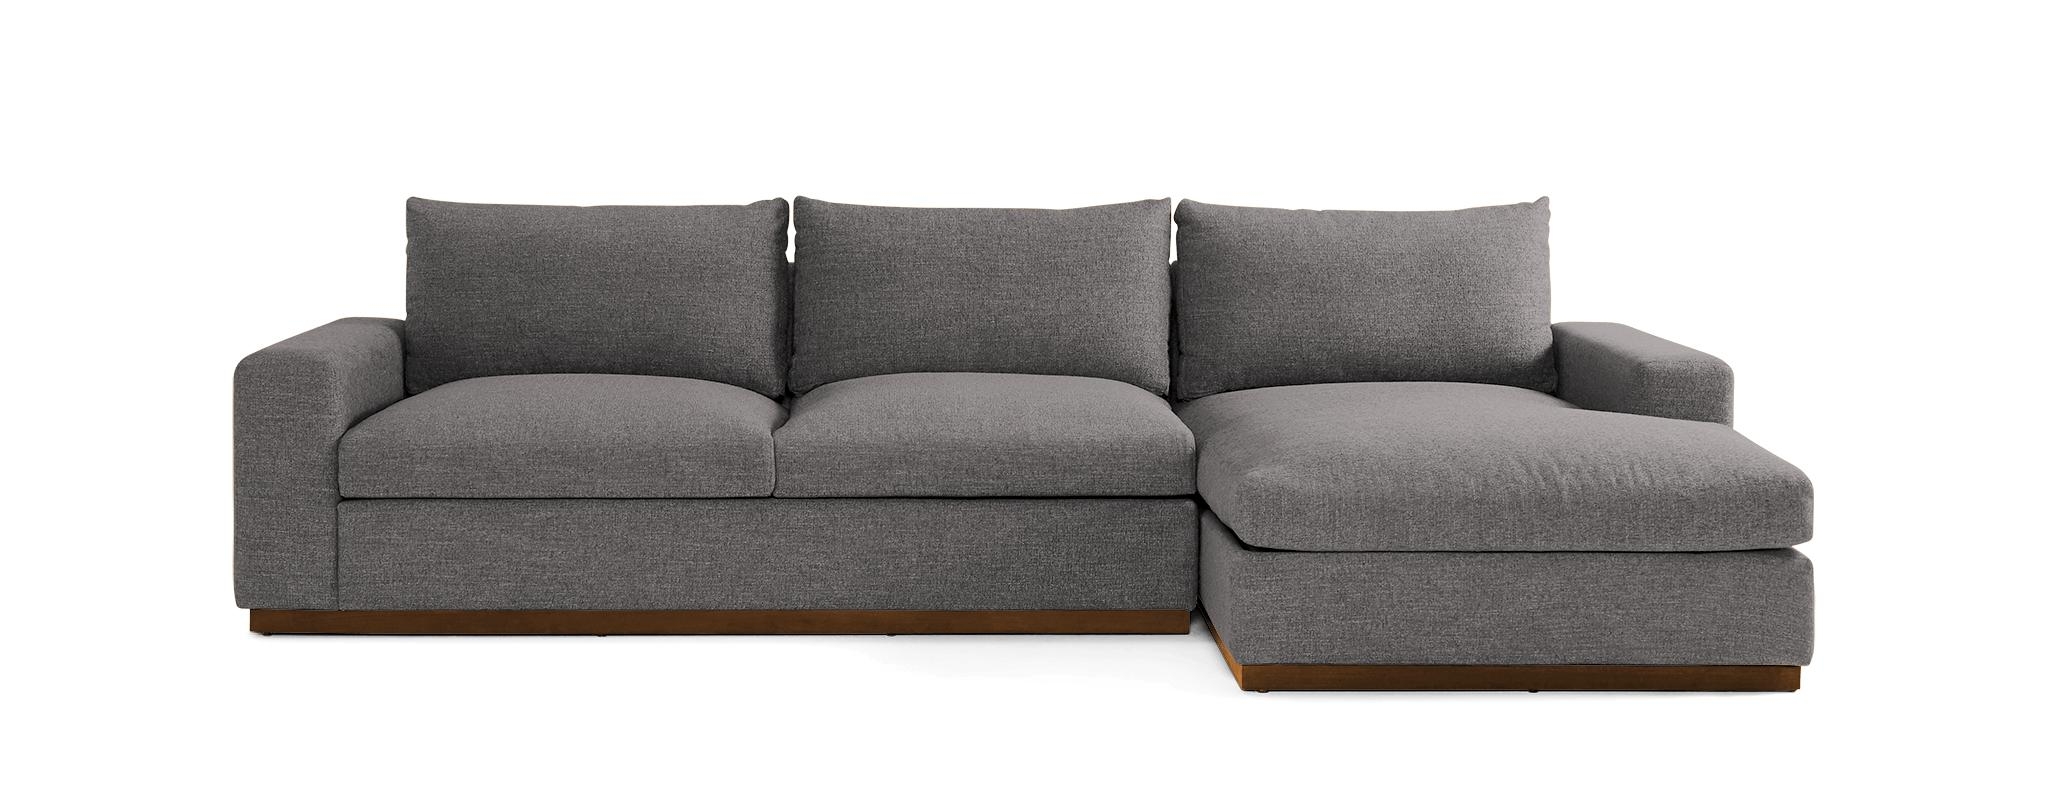 Gray Holt Mid Century Modern Sectional with Storage - Taylor Felt Grey - Mocha - Right - Image 0